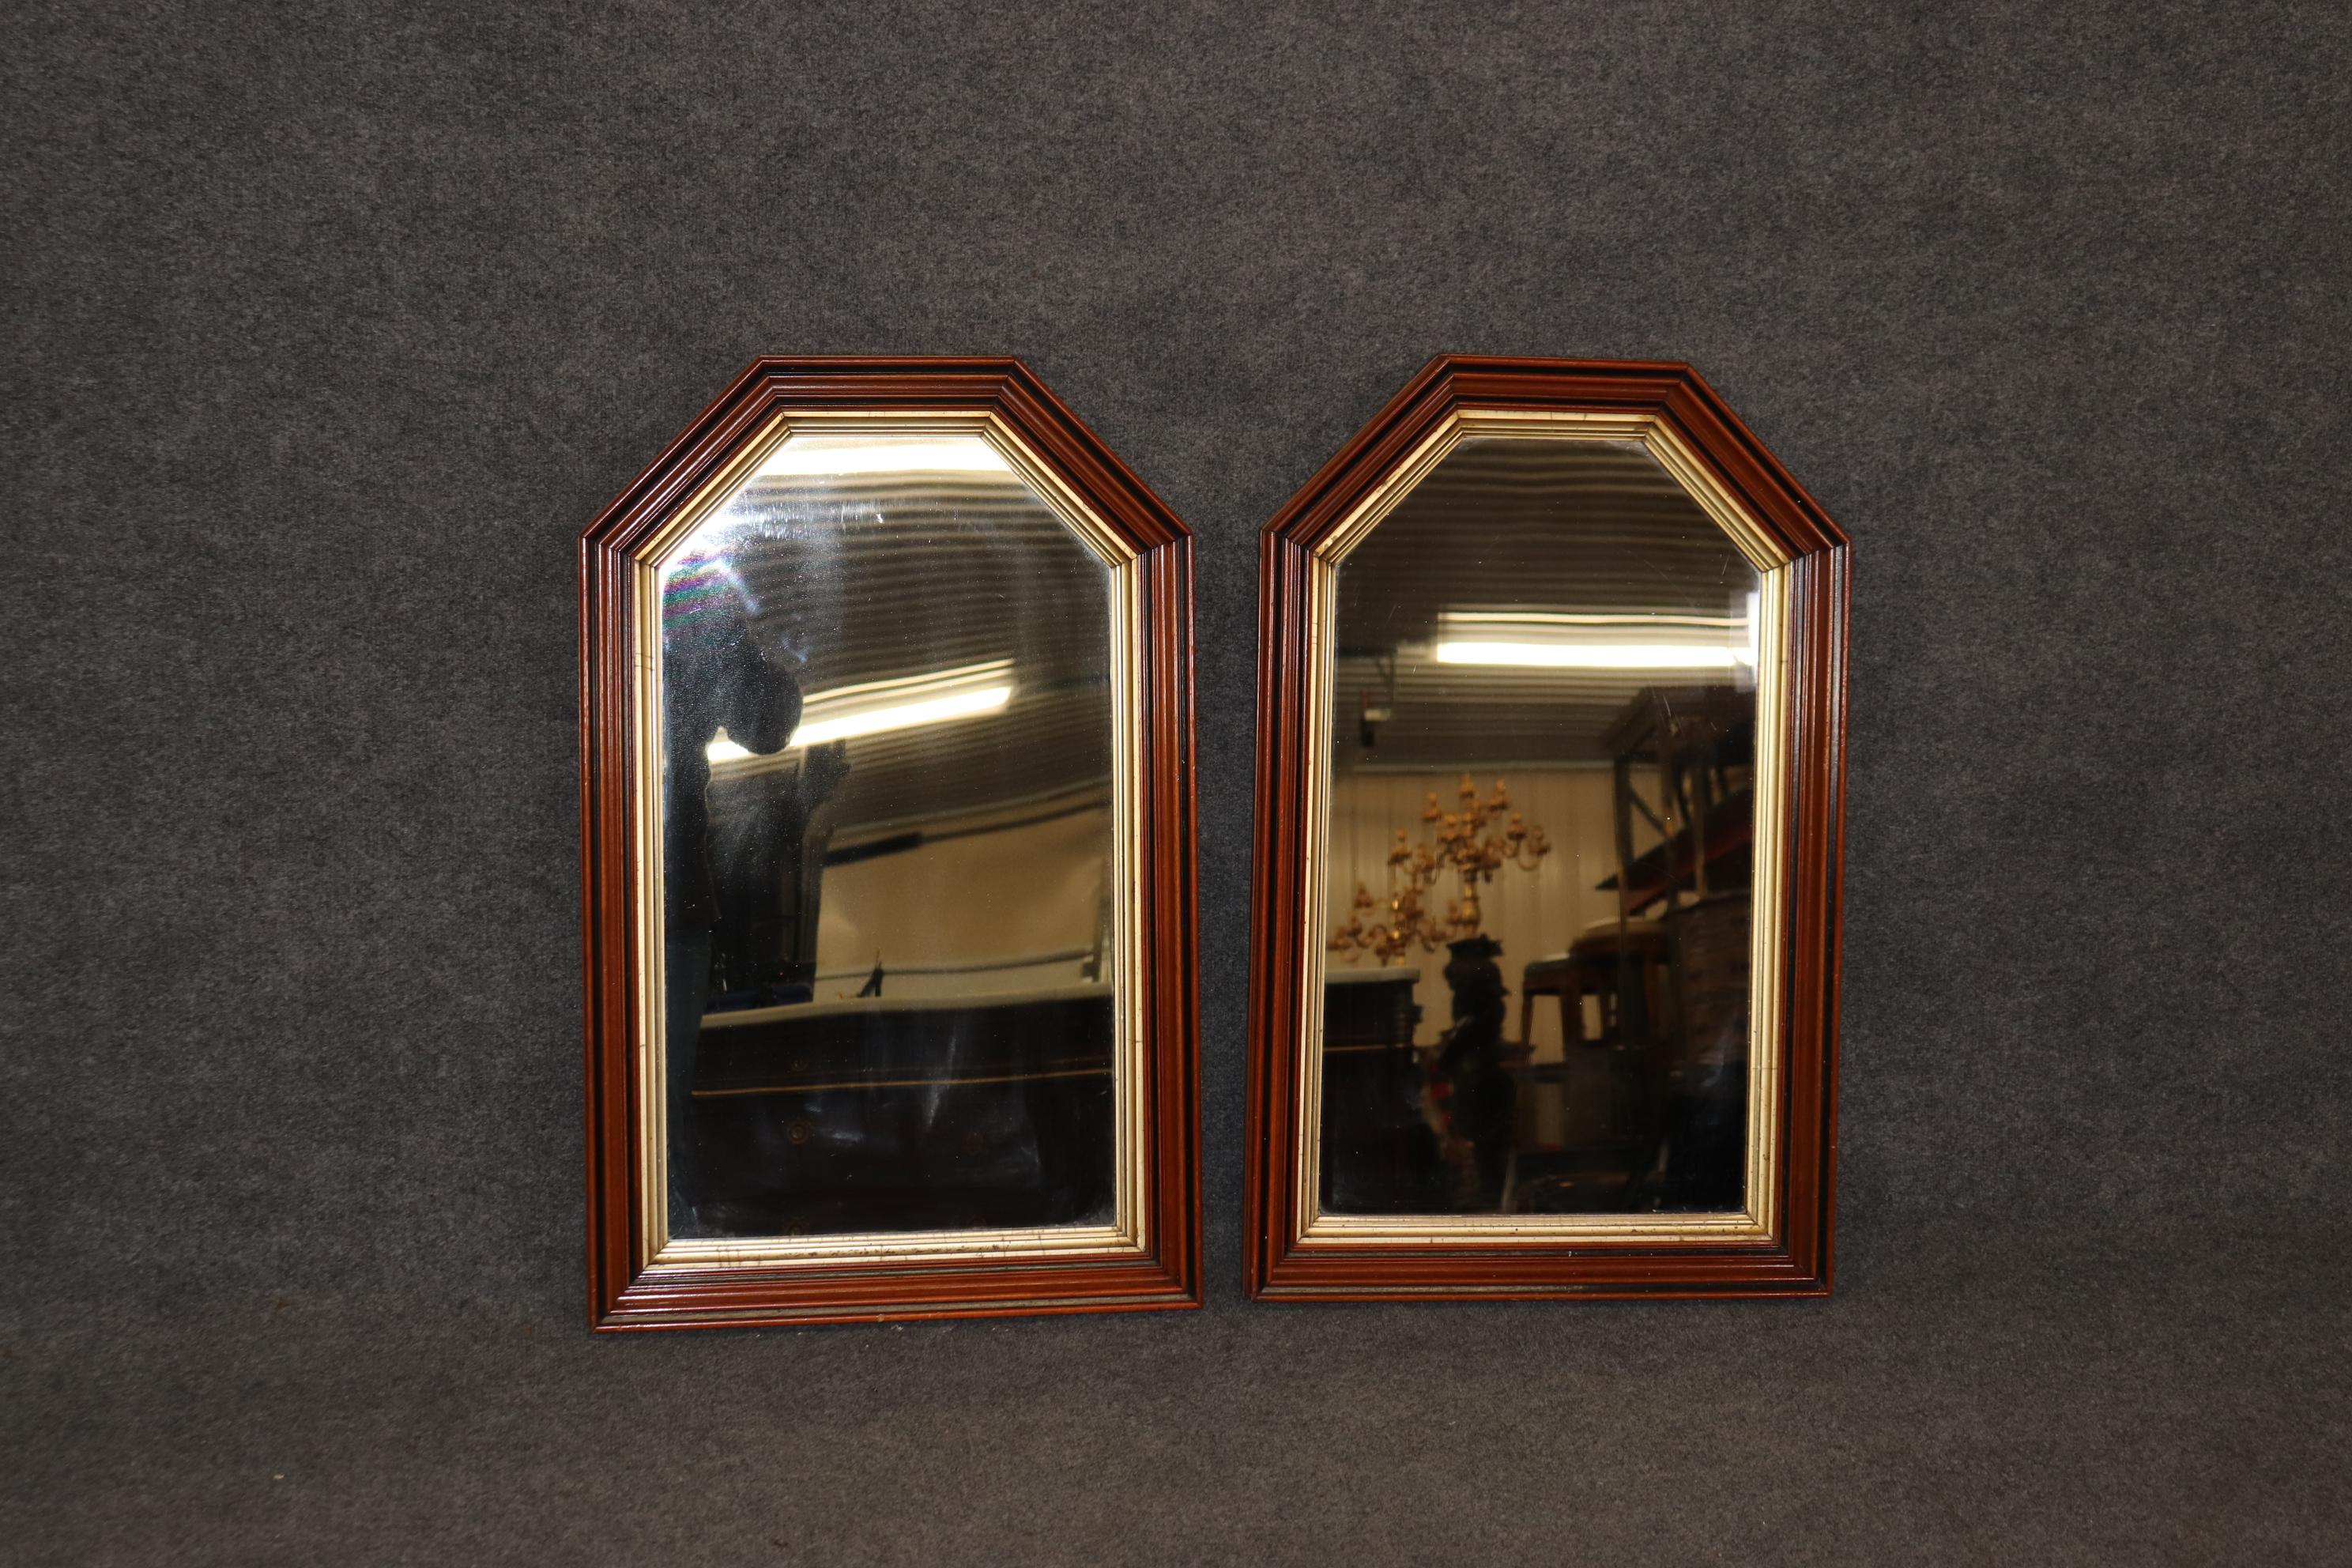 This is a unique pair of beautiful solid walnut geometric mirrors that evoque a Gothic feeling. The interior of the molding is done in bright gold leaf and in good condition. The mirrors date to the 1880s era and are European and measure 35.5 tall x